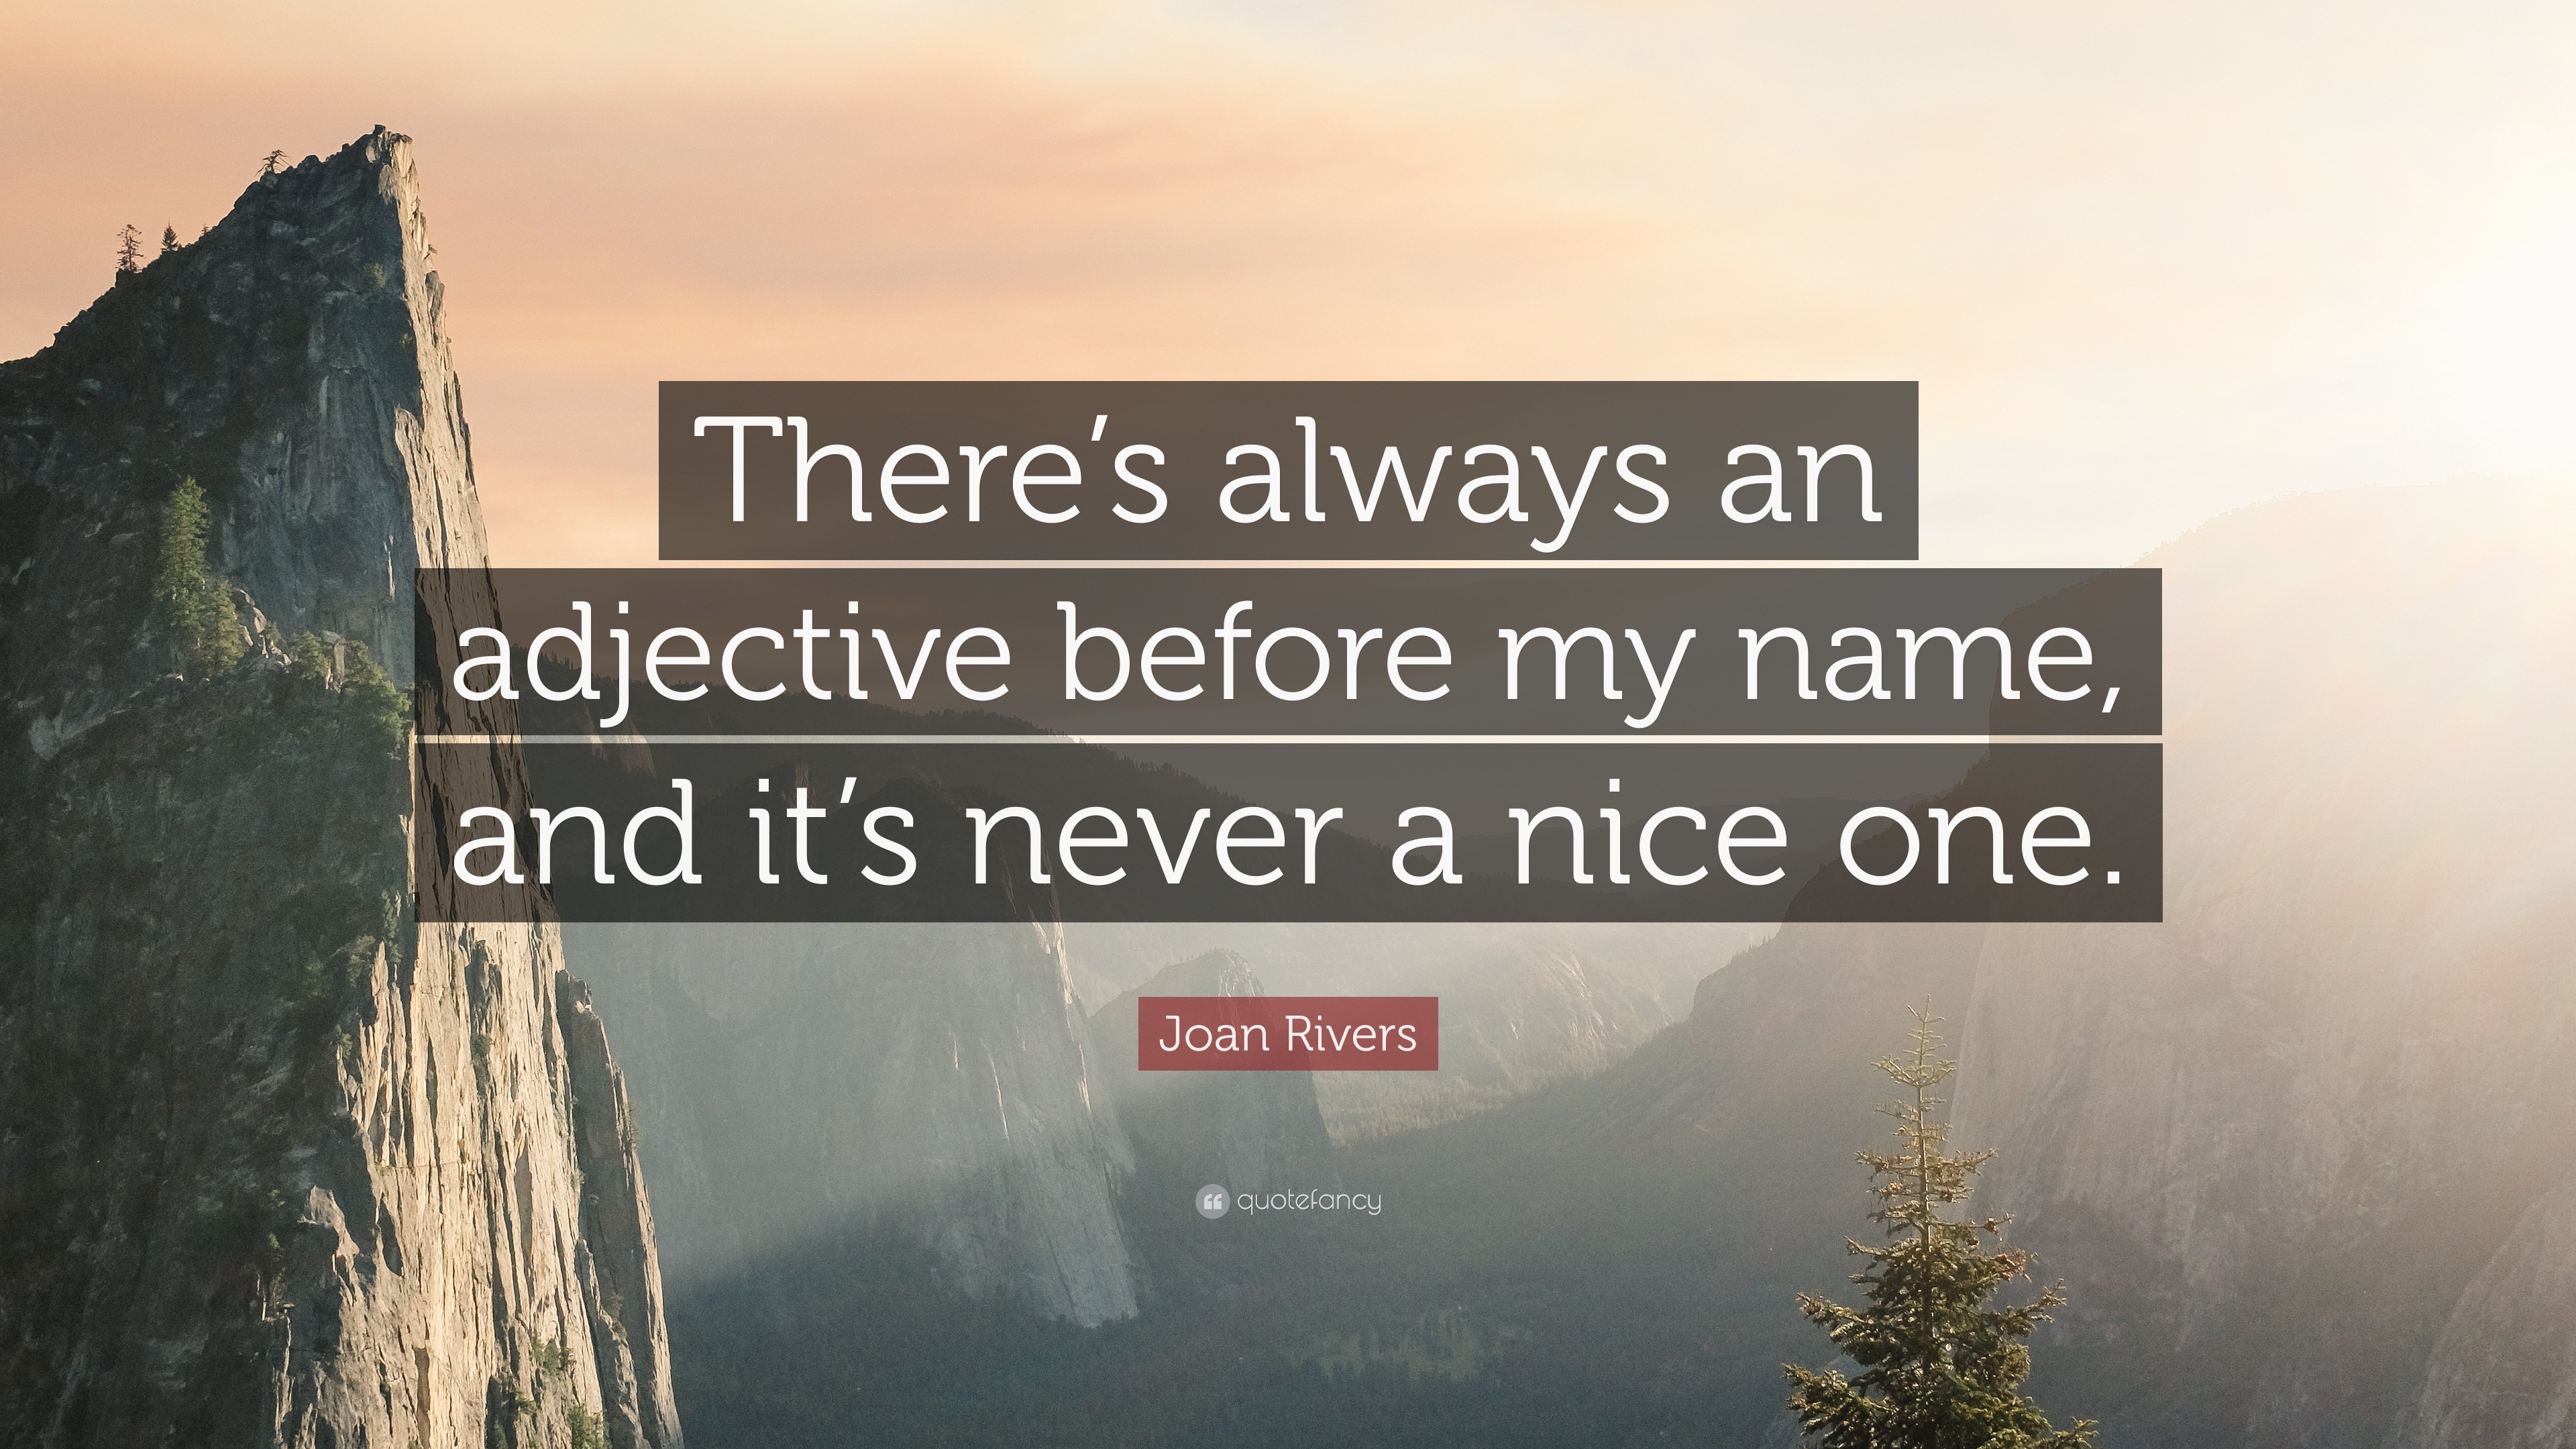 joan-rivers-quote-there-s-always-an-adjective-before-my-name-and-it-s-never-a-nice-one